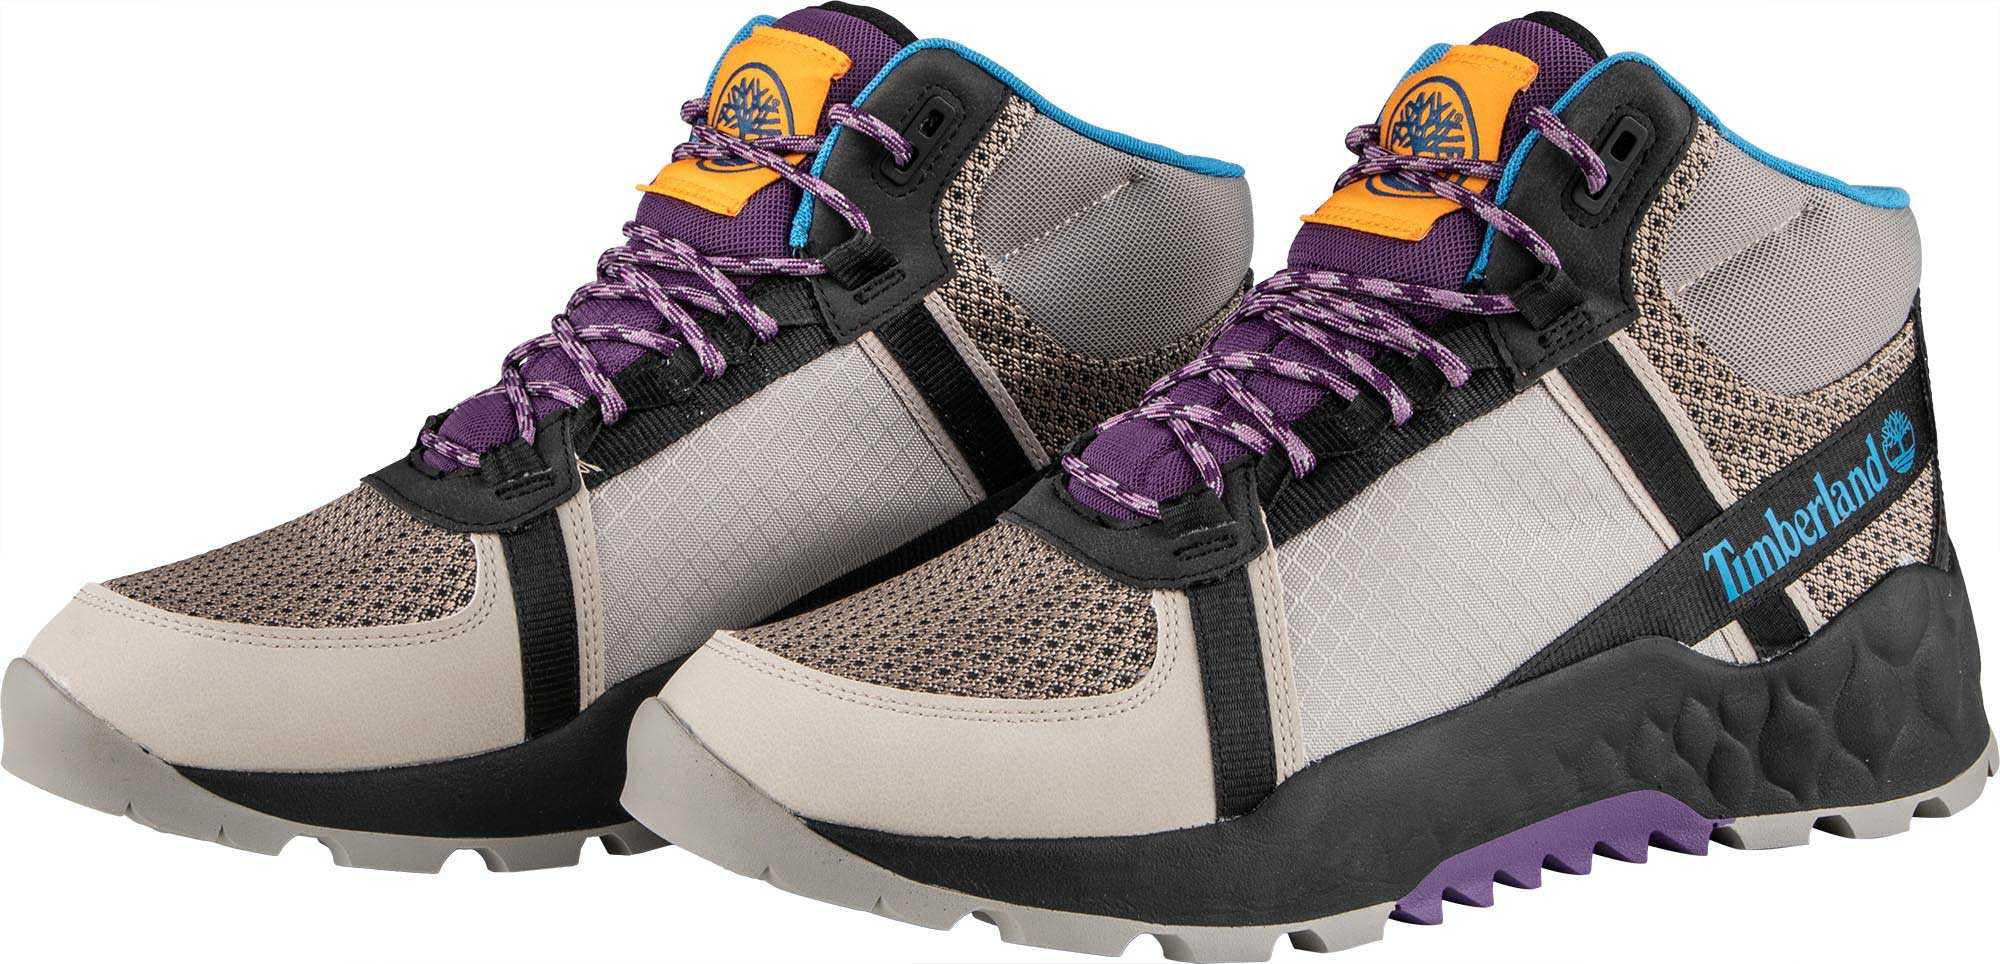 Men's insulated shoes